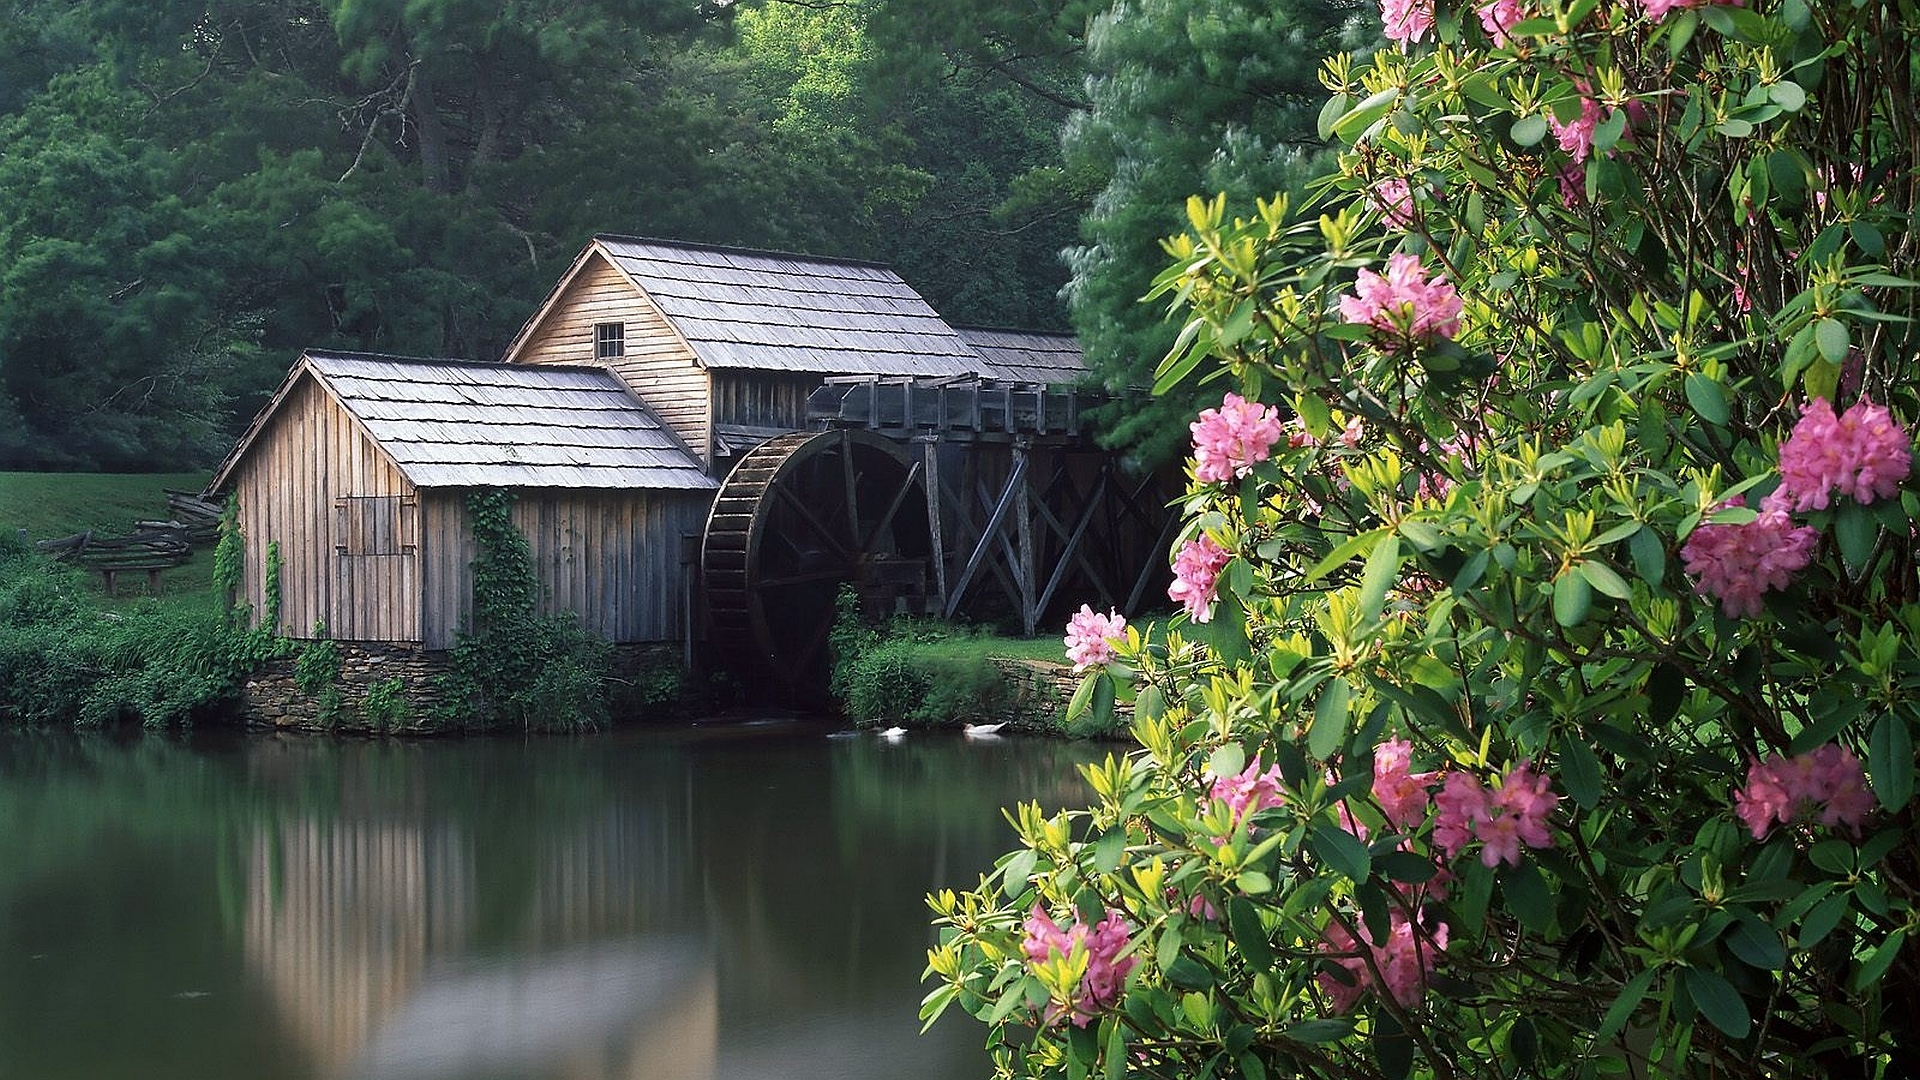 Rustic watermill standing by a flowing river, creating a serene countryside ambiance.